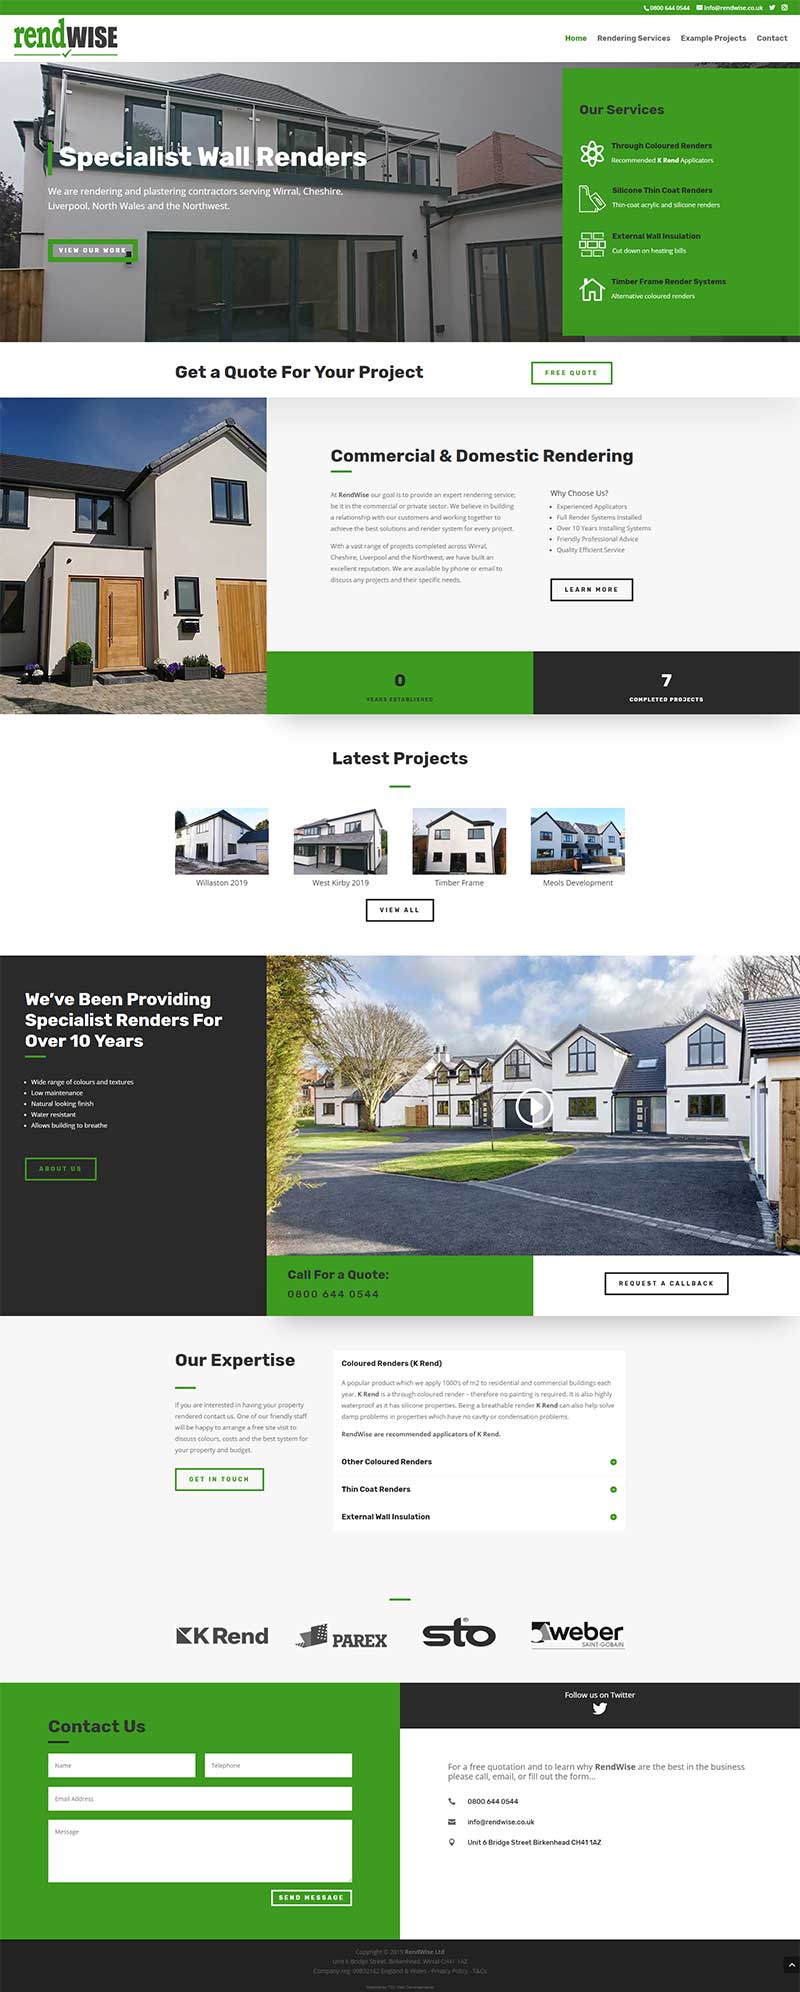 Screenshot of the RendWise home page